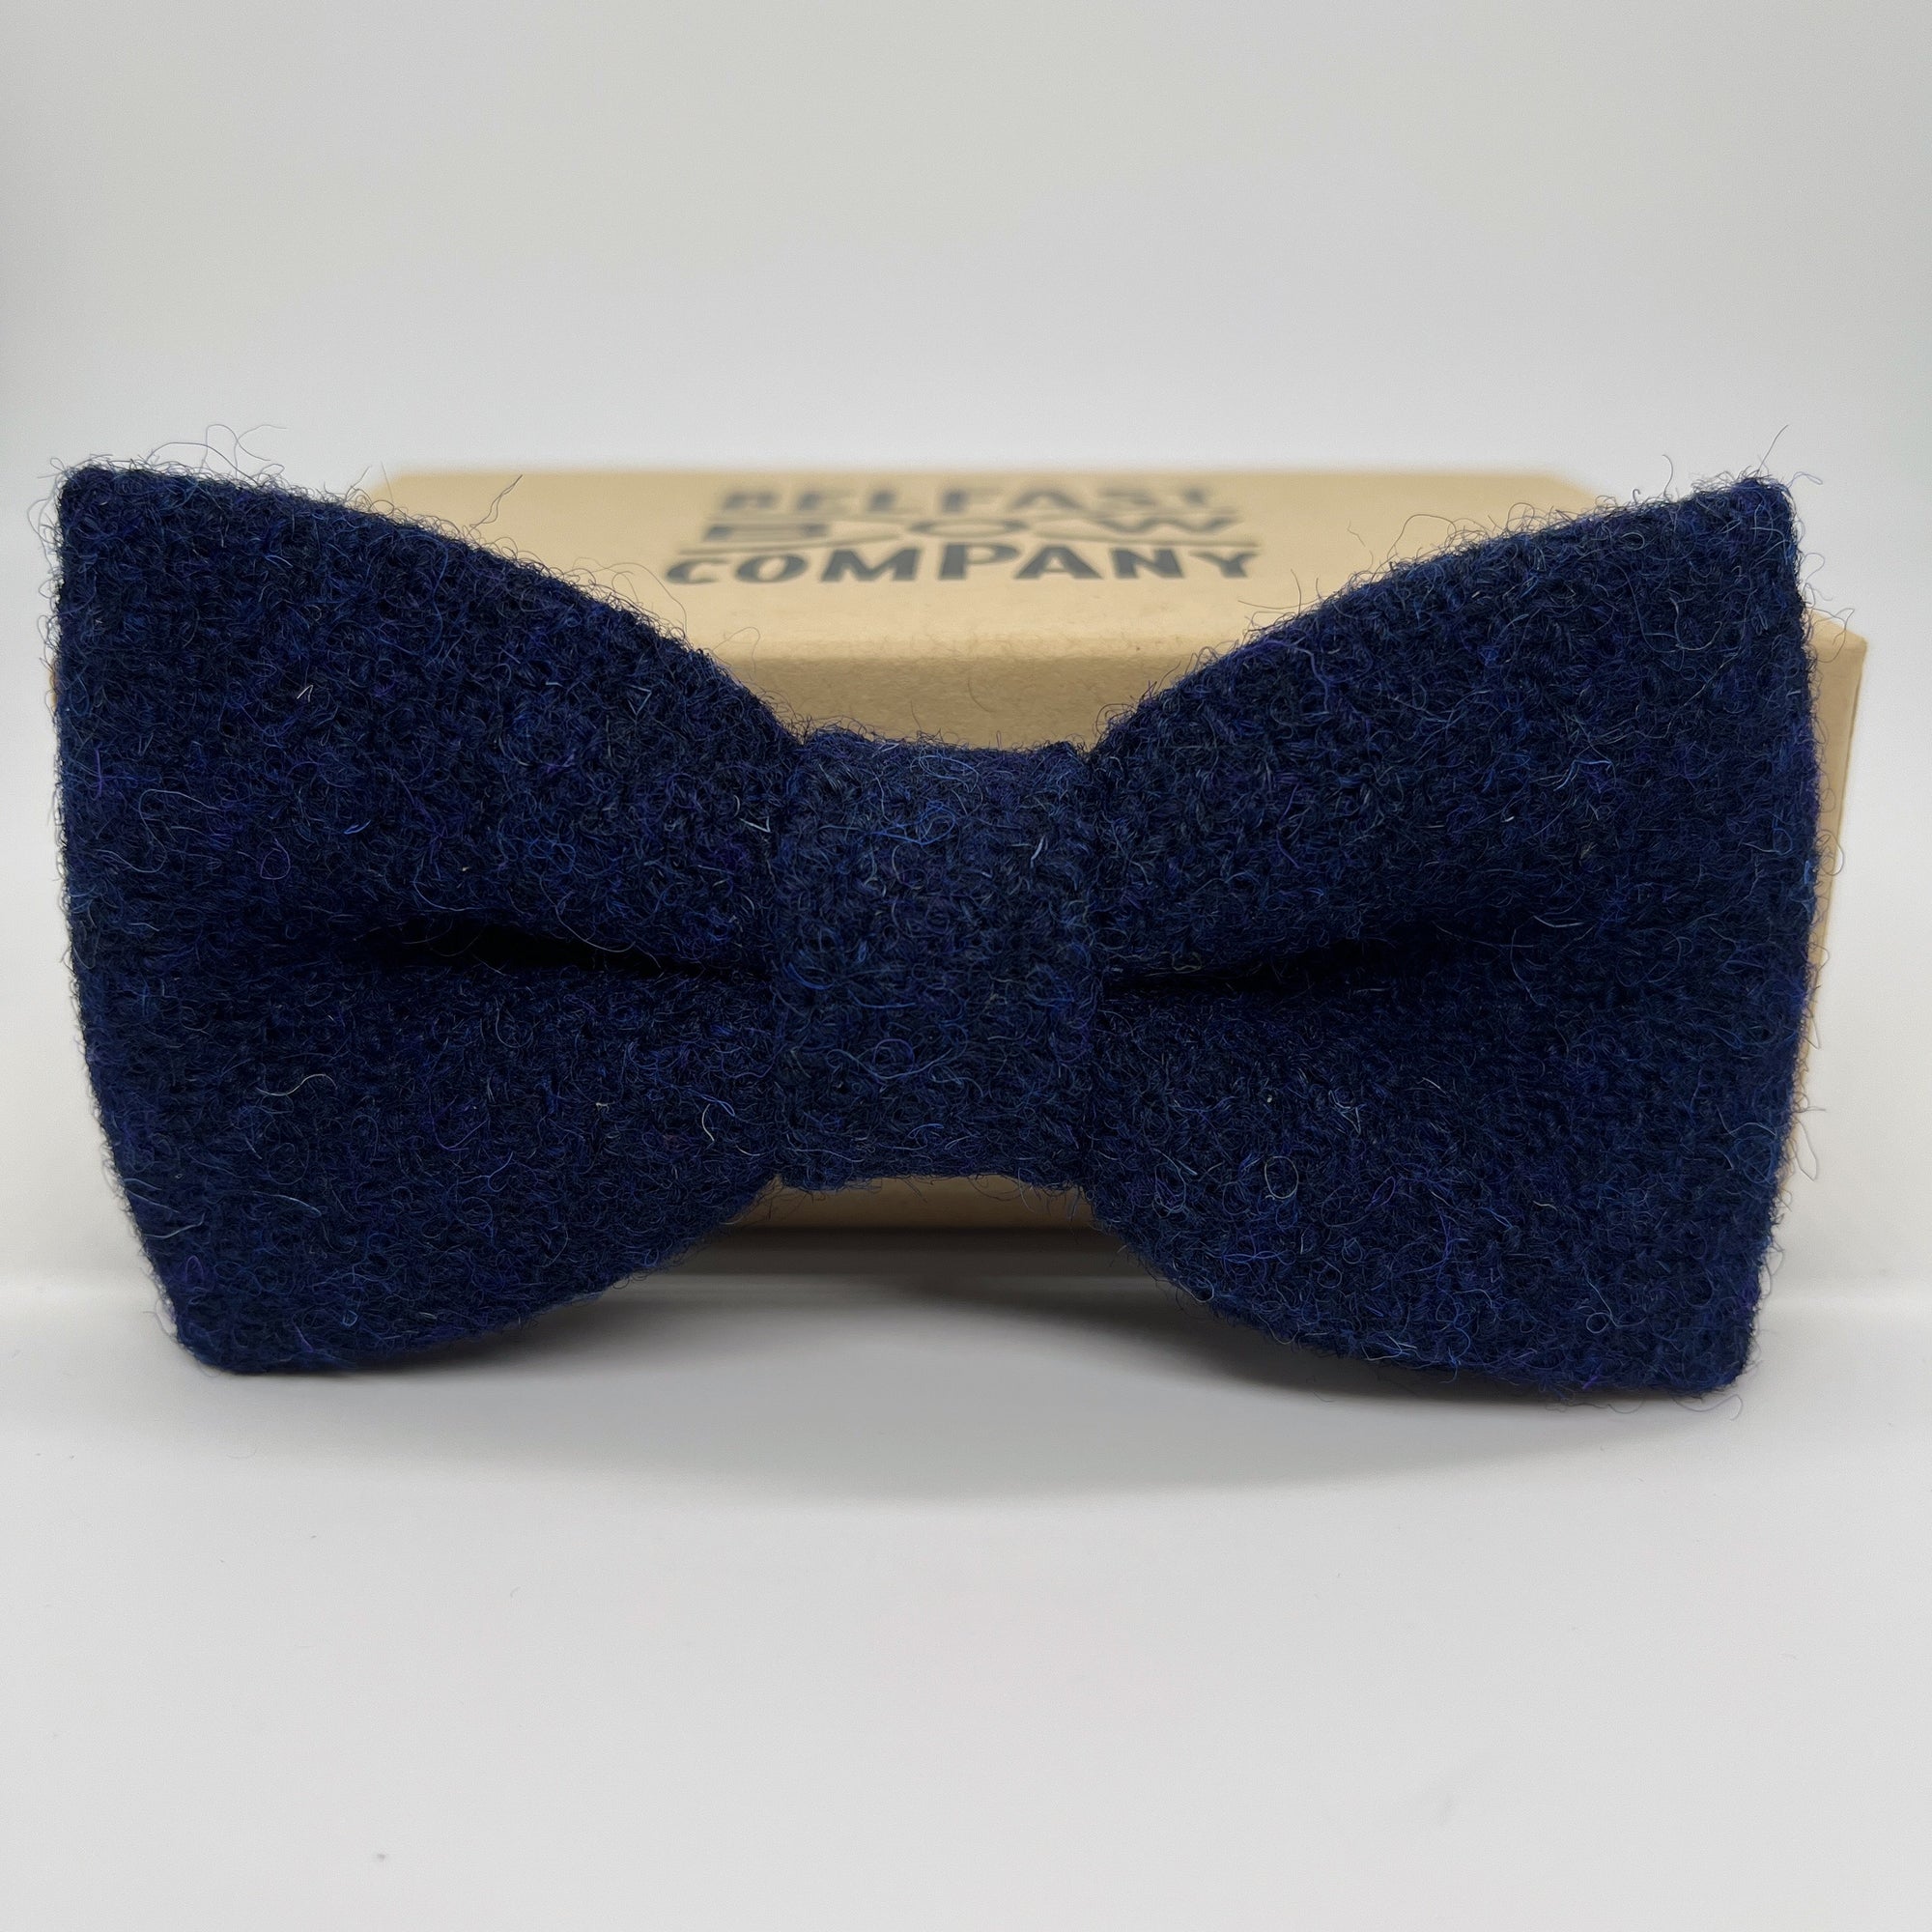 Harris Tweed Bow Tie in Navy by the Belfast Bow Company